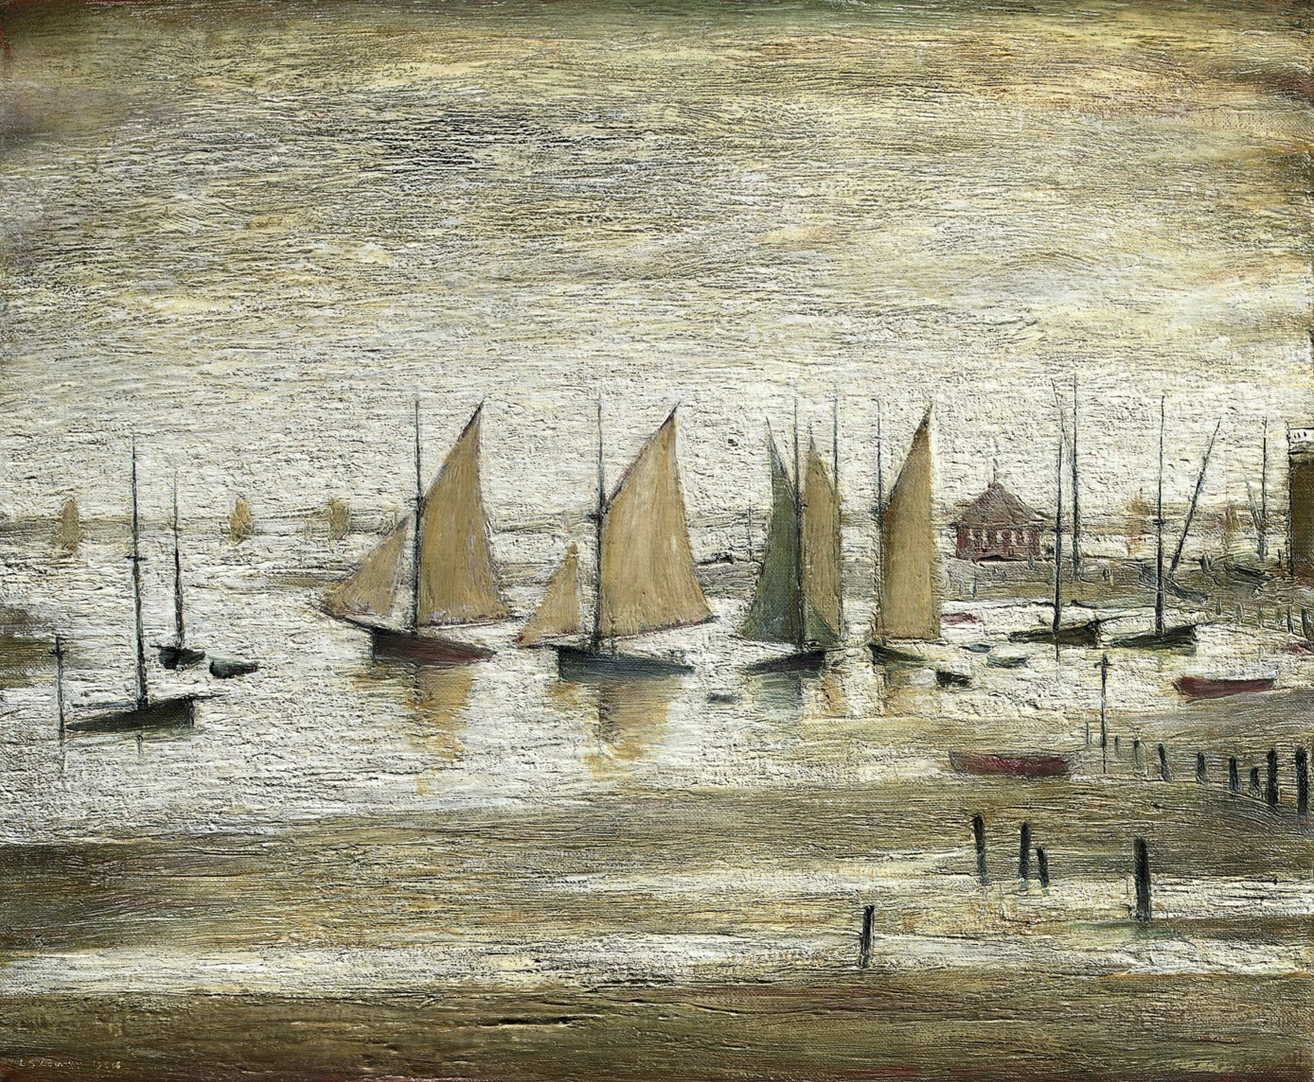 Yachts at Lytham (1950) by Laurence Stephen Lowry (1887 - 1976), English artist.